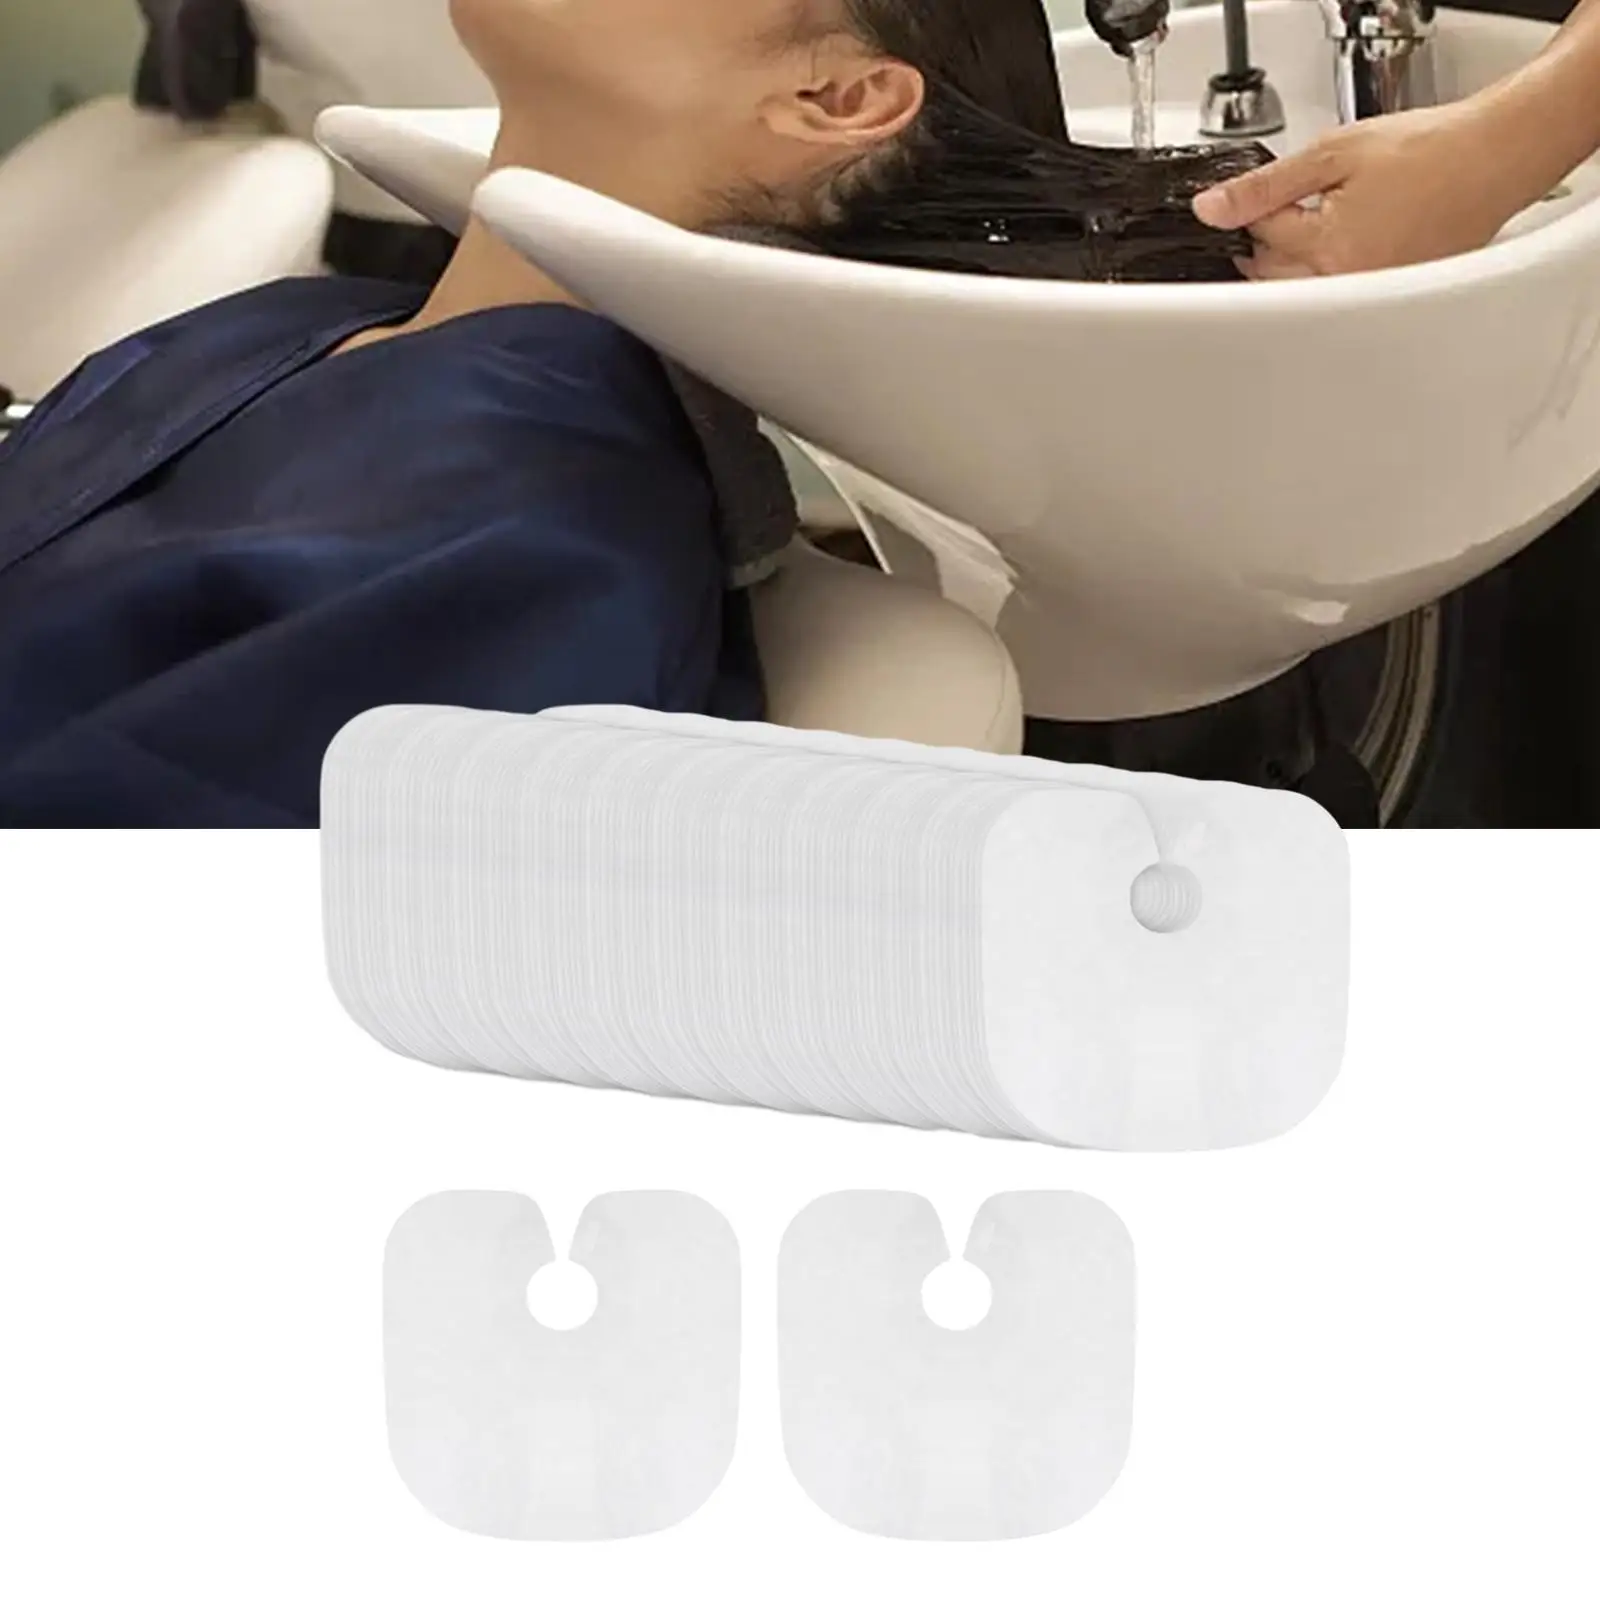 Disposable Salon Cape Protects Waterproof Tool Lightweight Accessory for Salon Hairdressing Hair Dye Barbershop Clients Kids